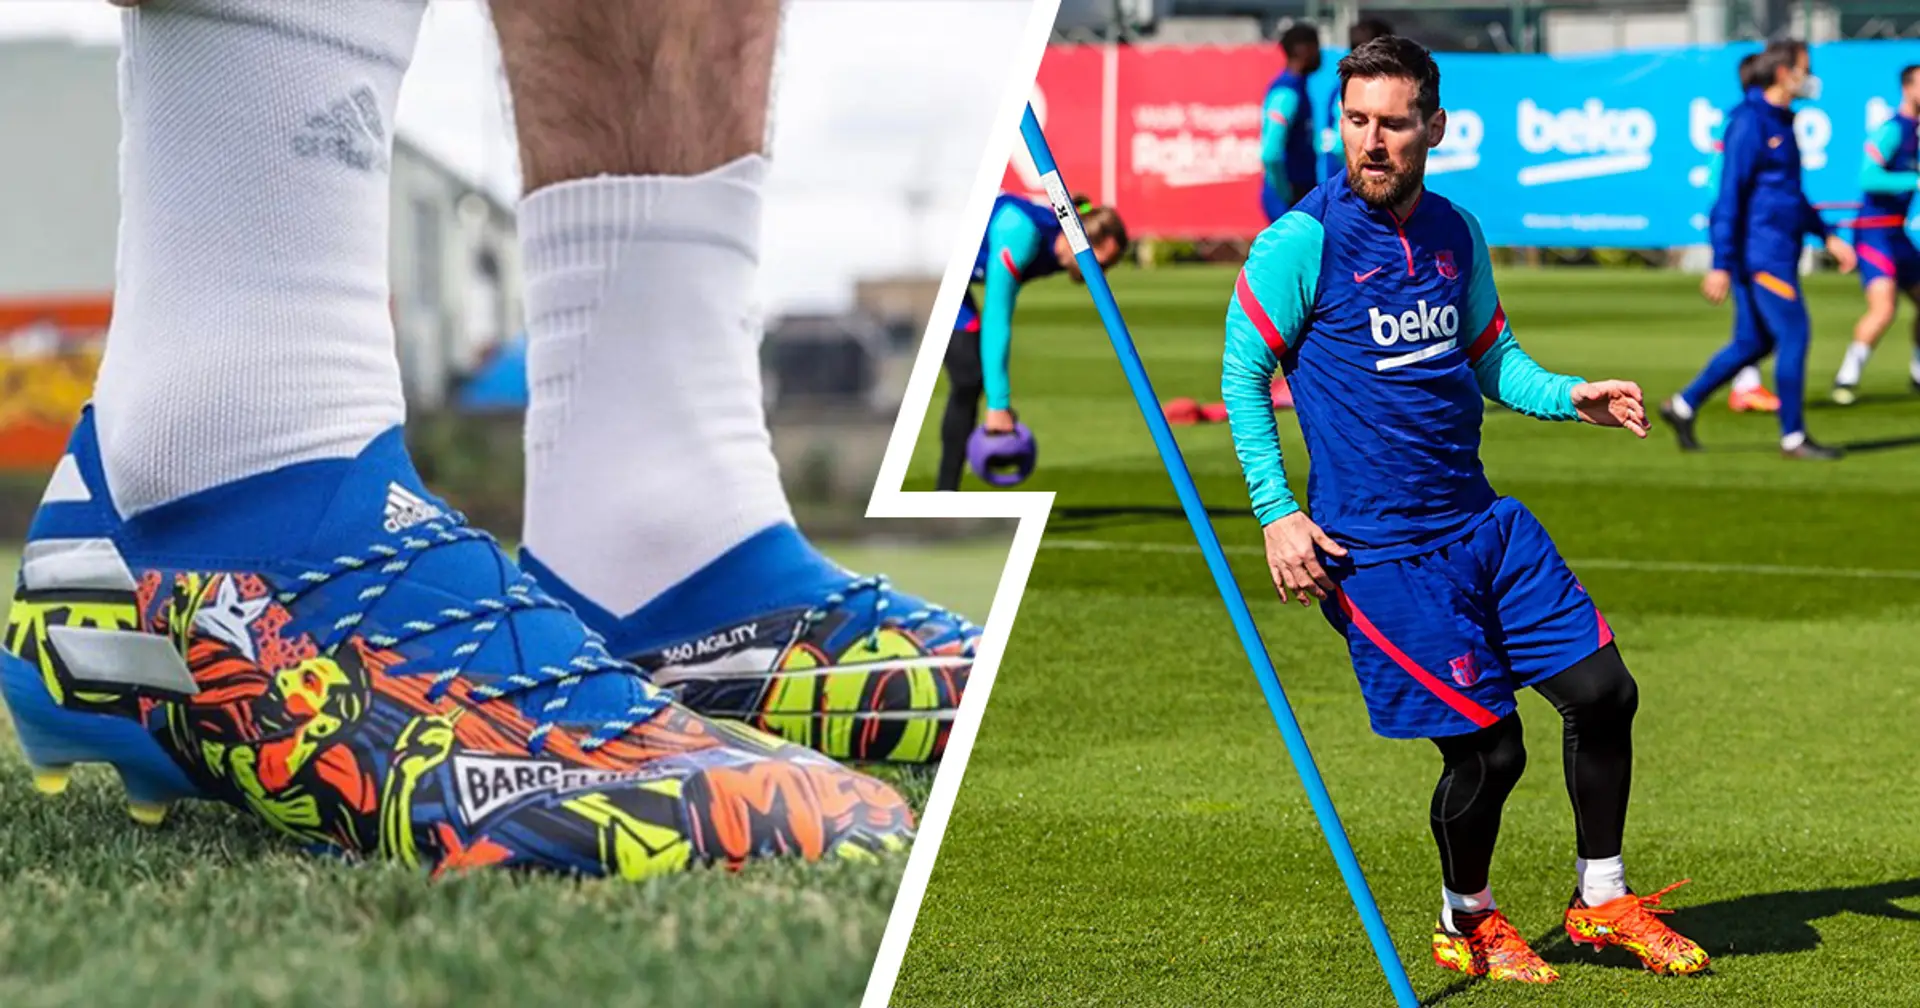 Messi shows off Adidas boots in 2020/21 season: price, design and other things to know - Football | Tribuna.com